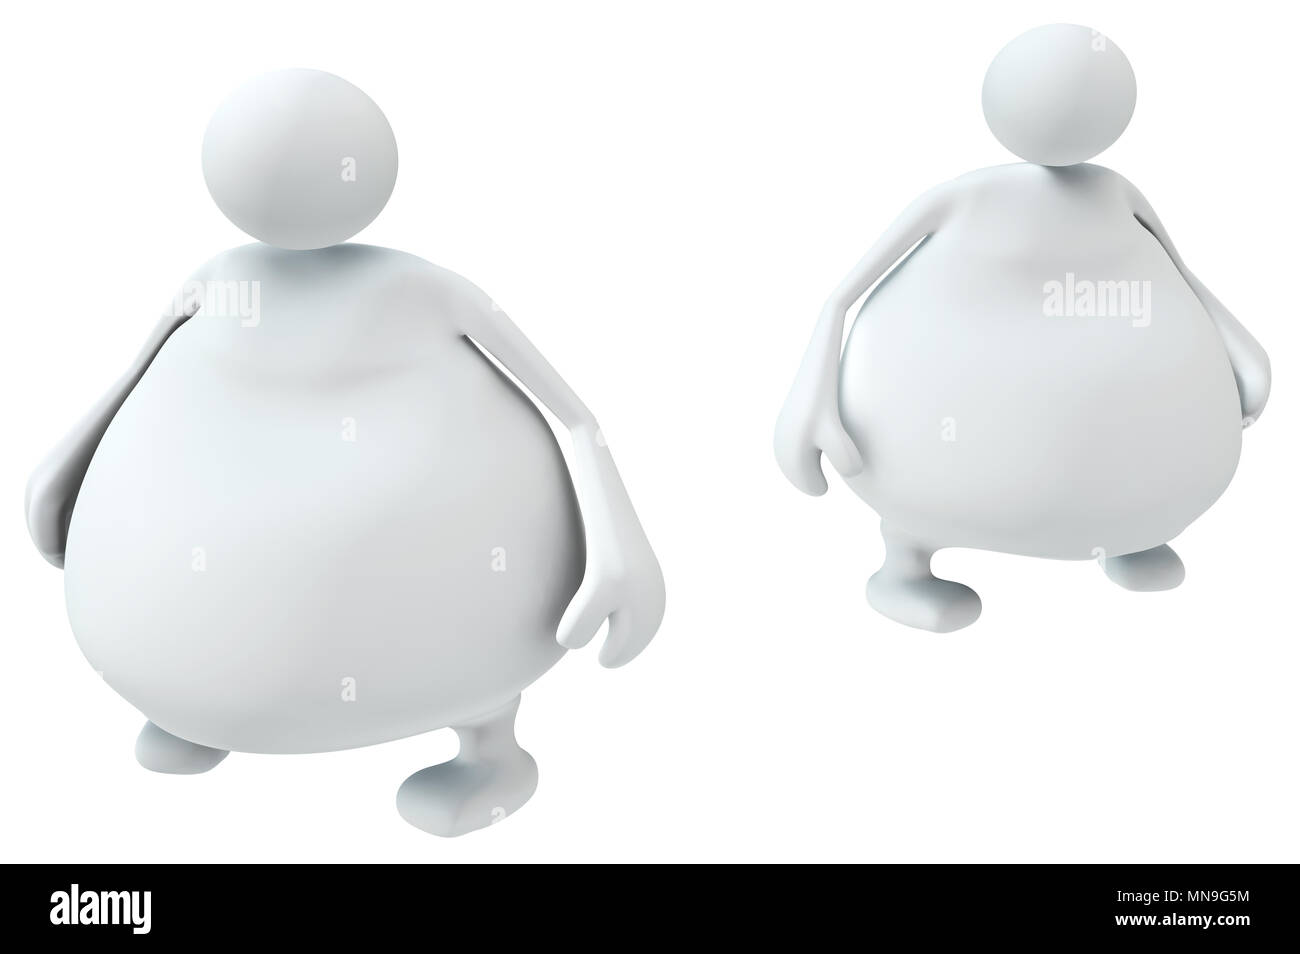 Overweight fat symbolic figures standing front and side, 3d illustration, horizontal, isolated Stock Photo